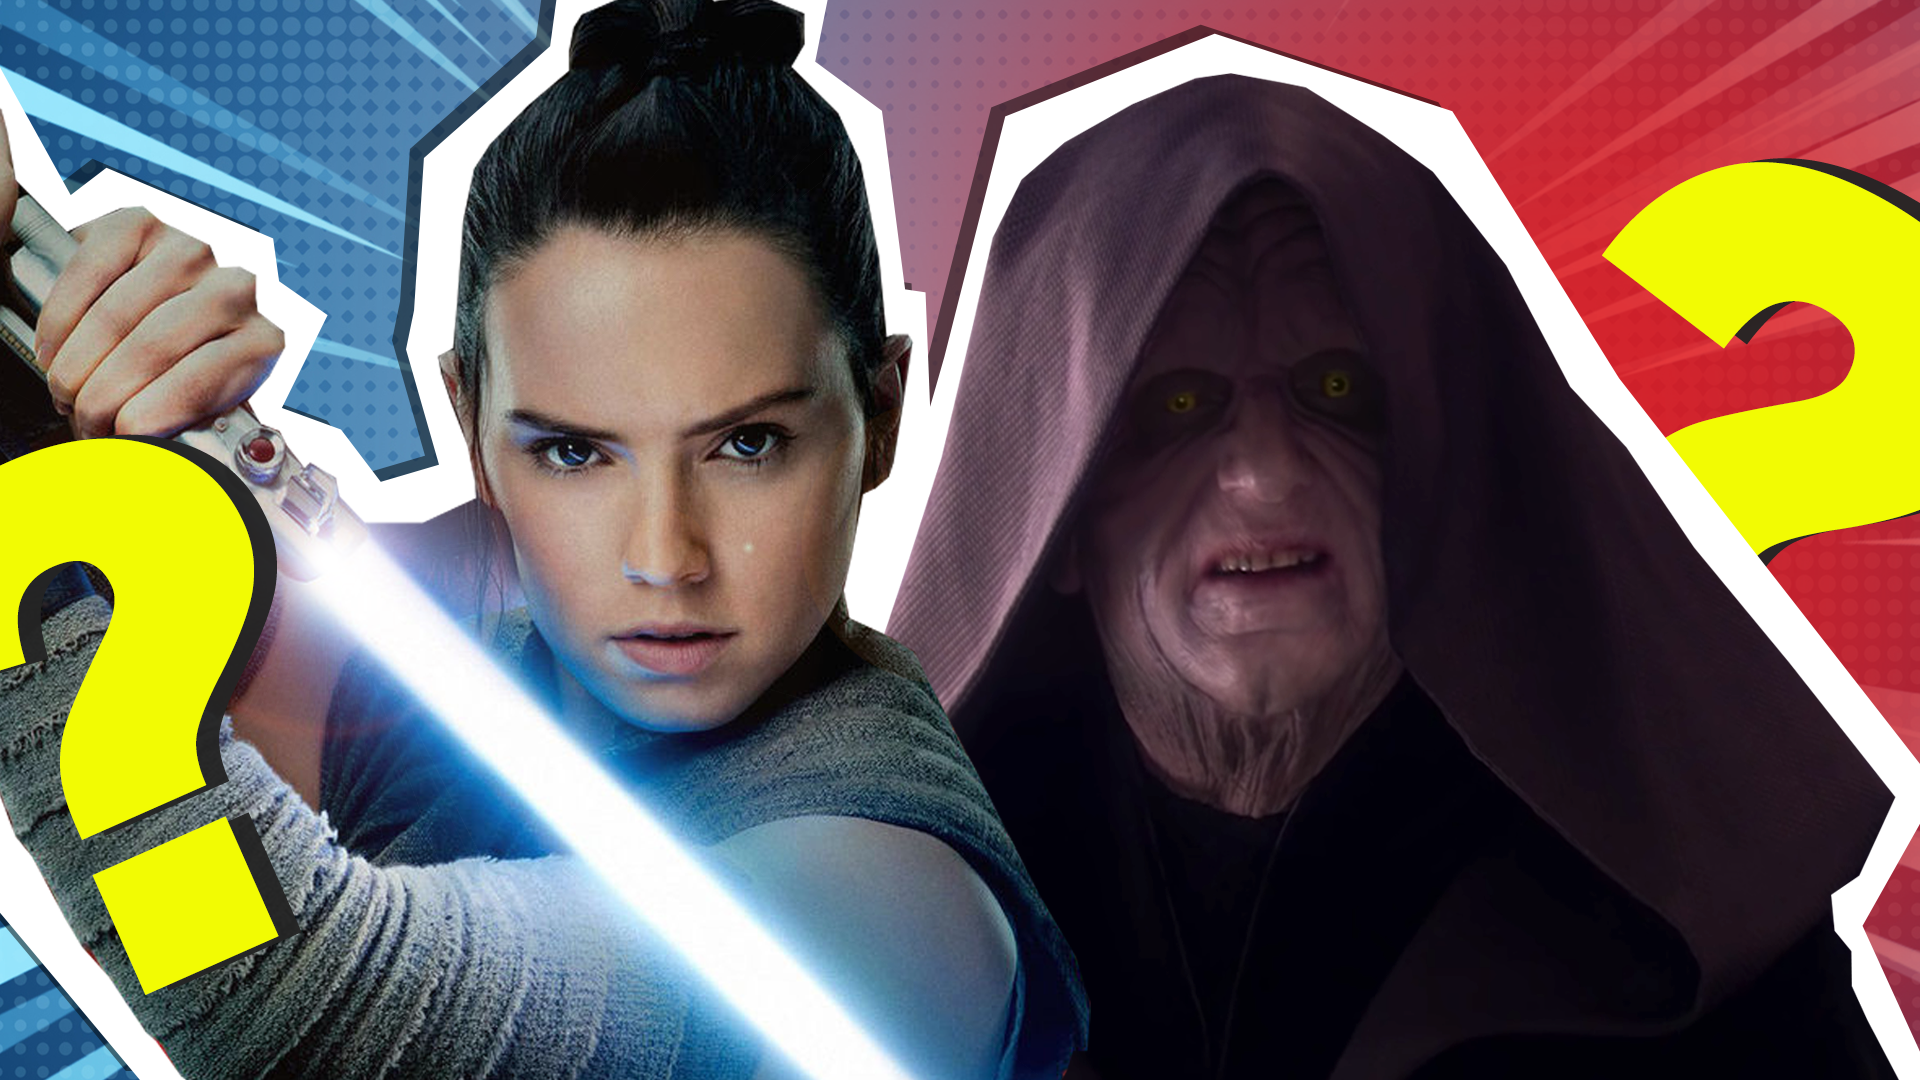 Rey and Emperor Palpatine